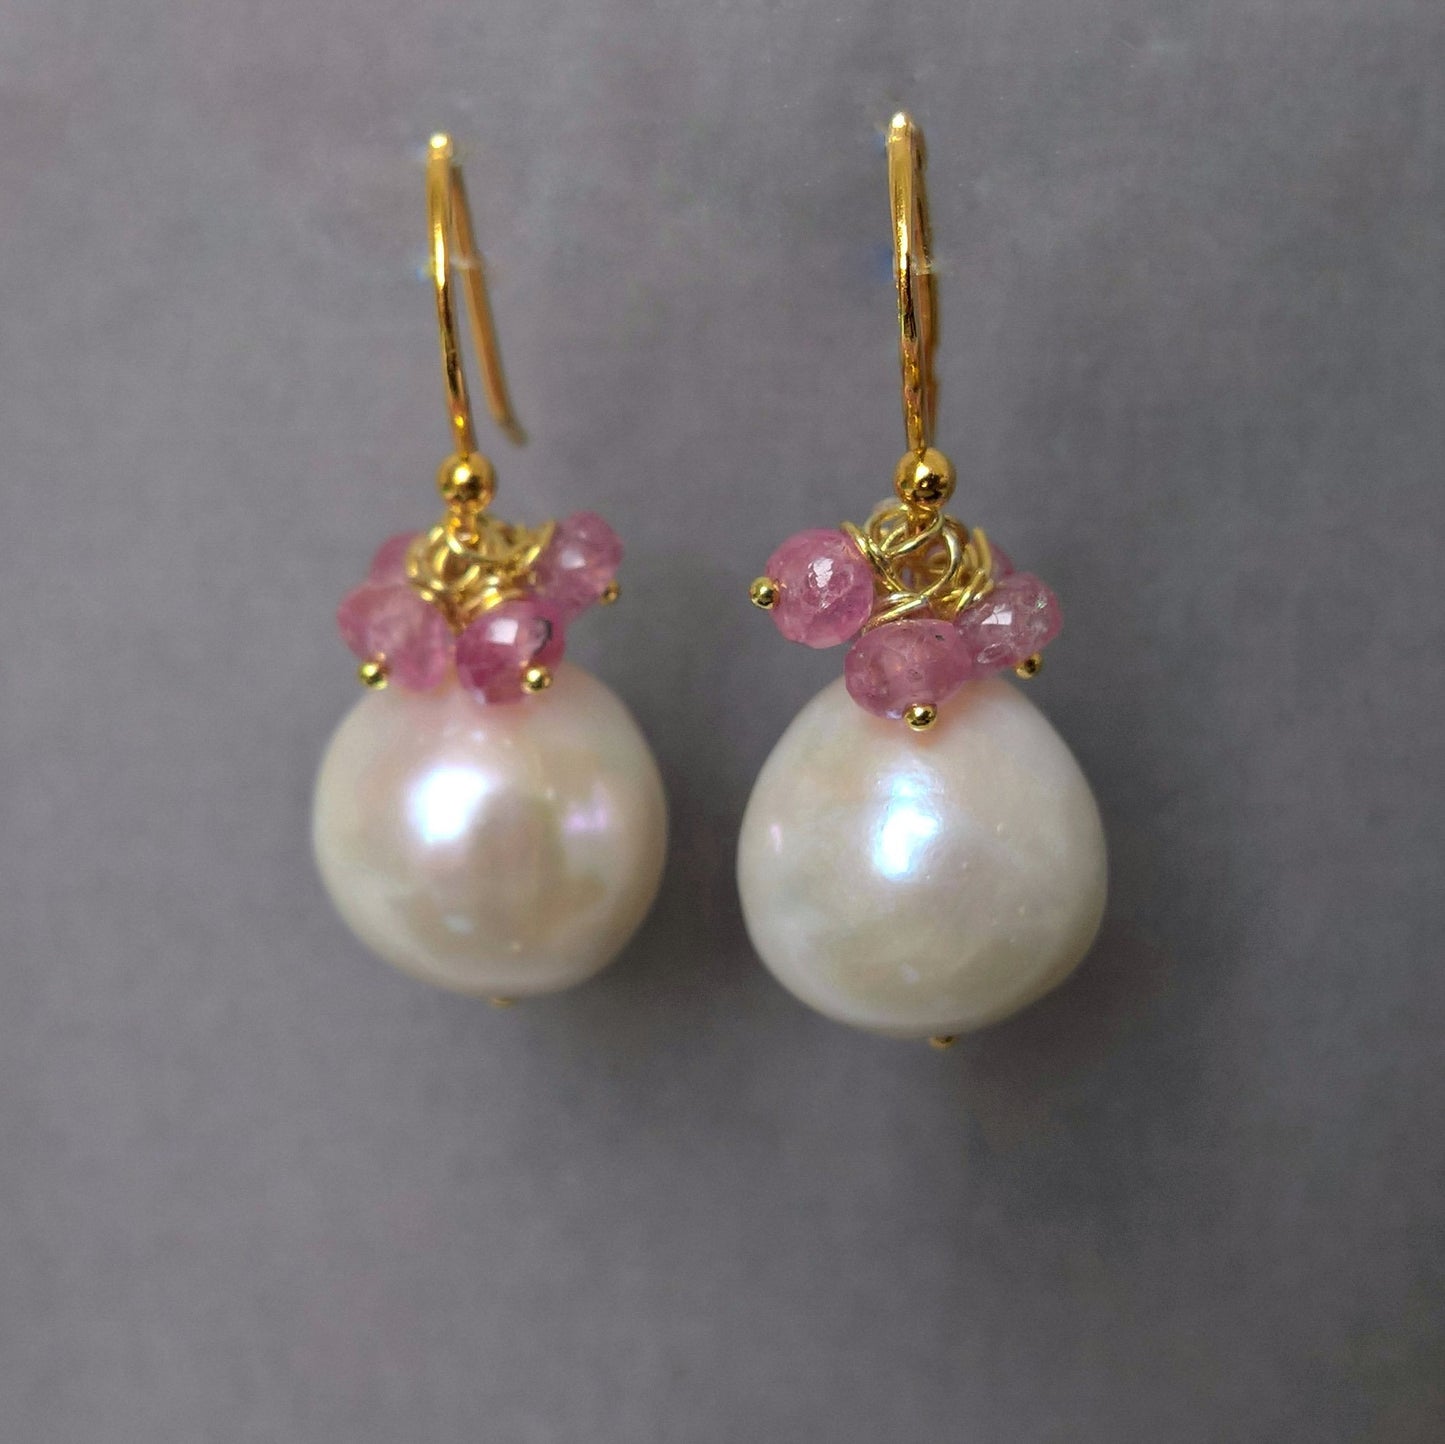 Pink sapphire and pearl drop earrings